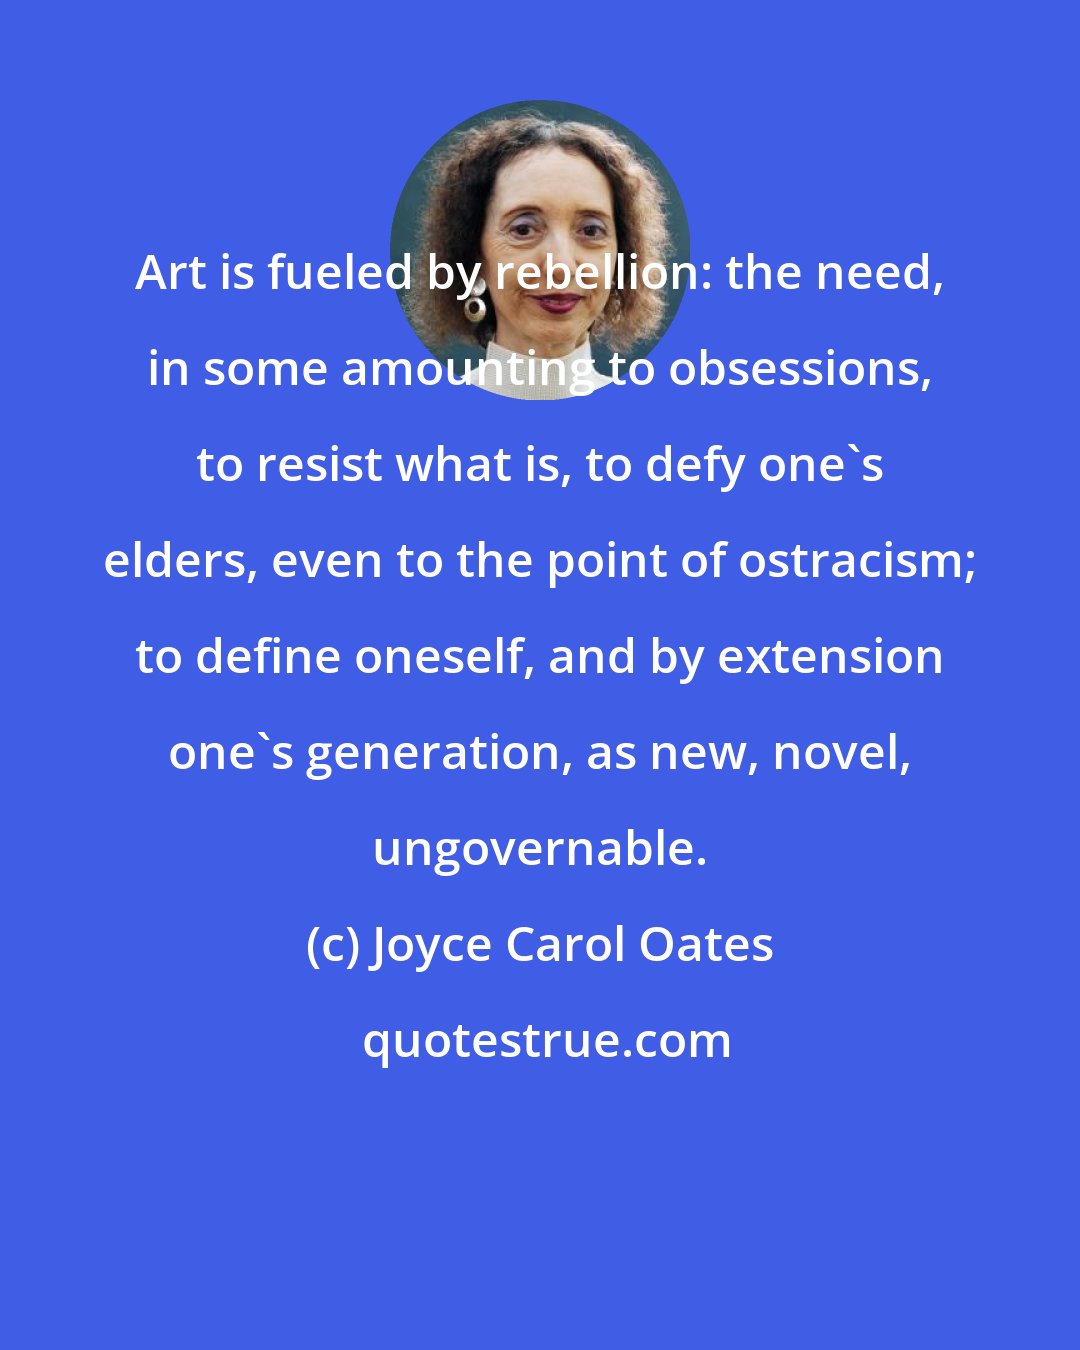 Joyce Carol Oates: Art is fueled by rebellion: the need, in some amounting to obsessions, to resist what is, to defy one's elders, even to the point of ostracism; to define oneself, and by extension one's generation, as new, novel, ungovernable.